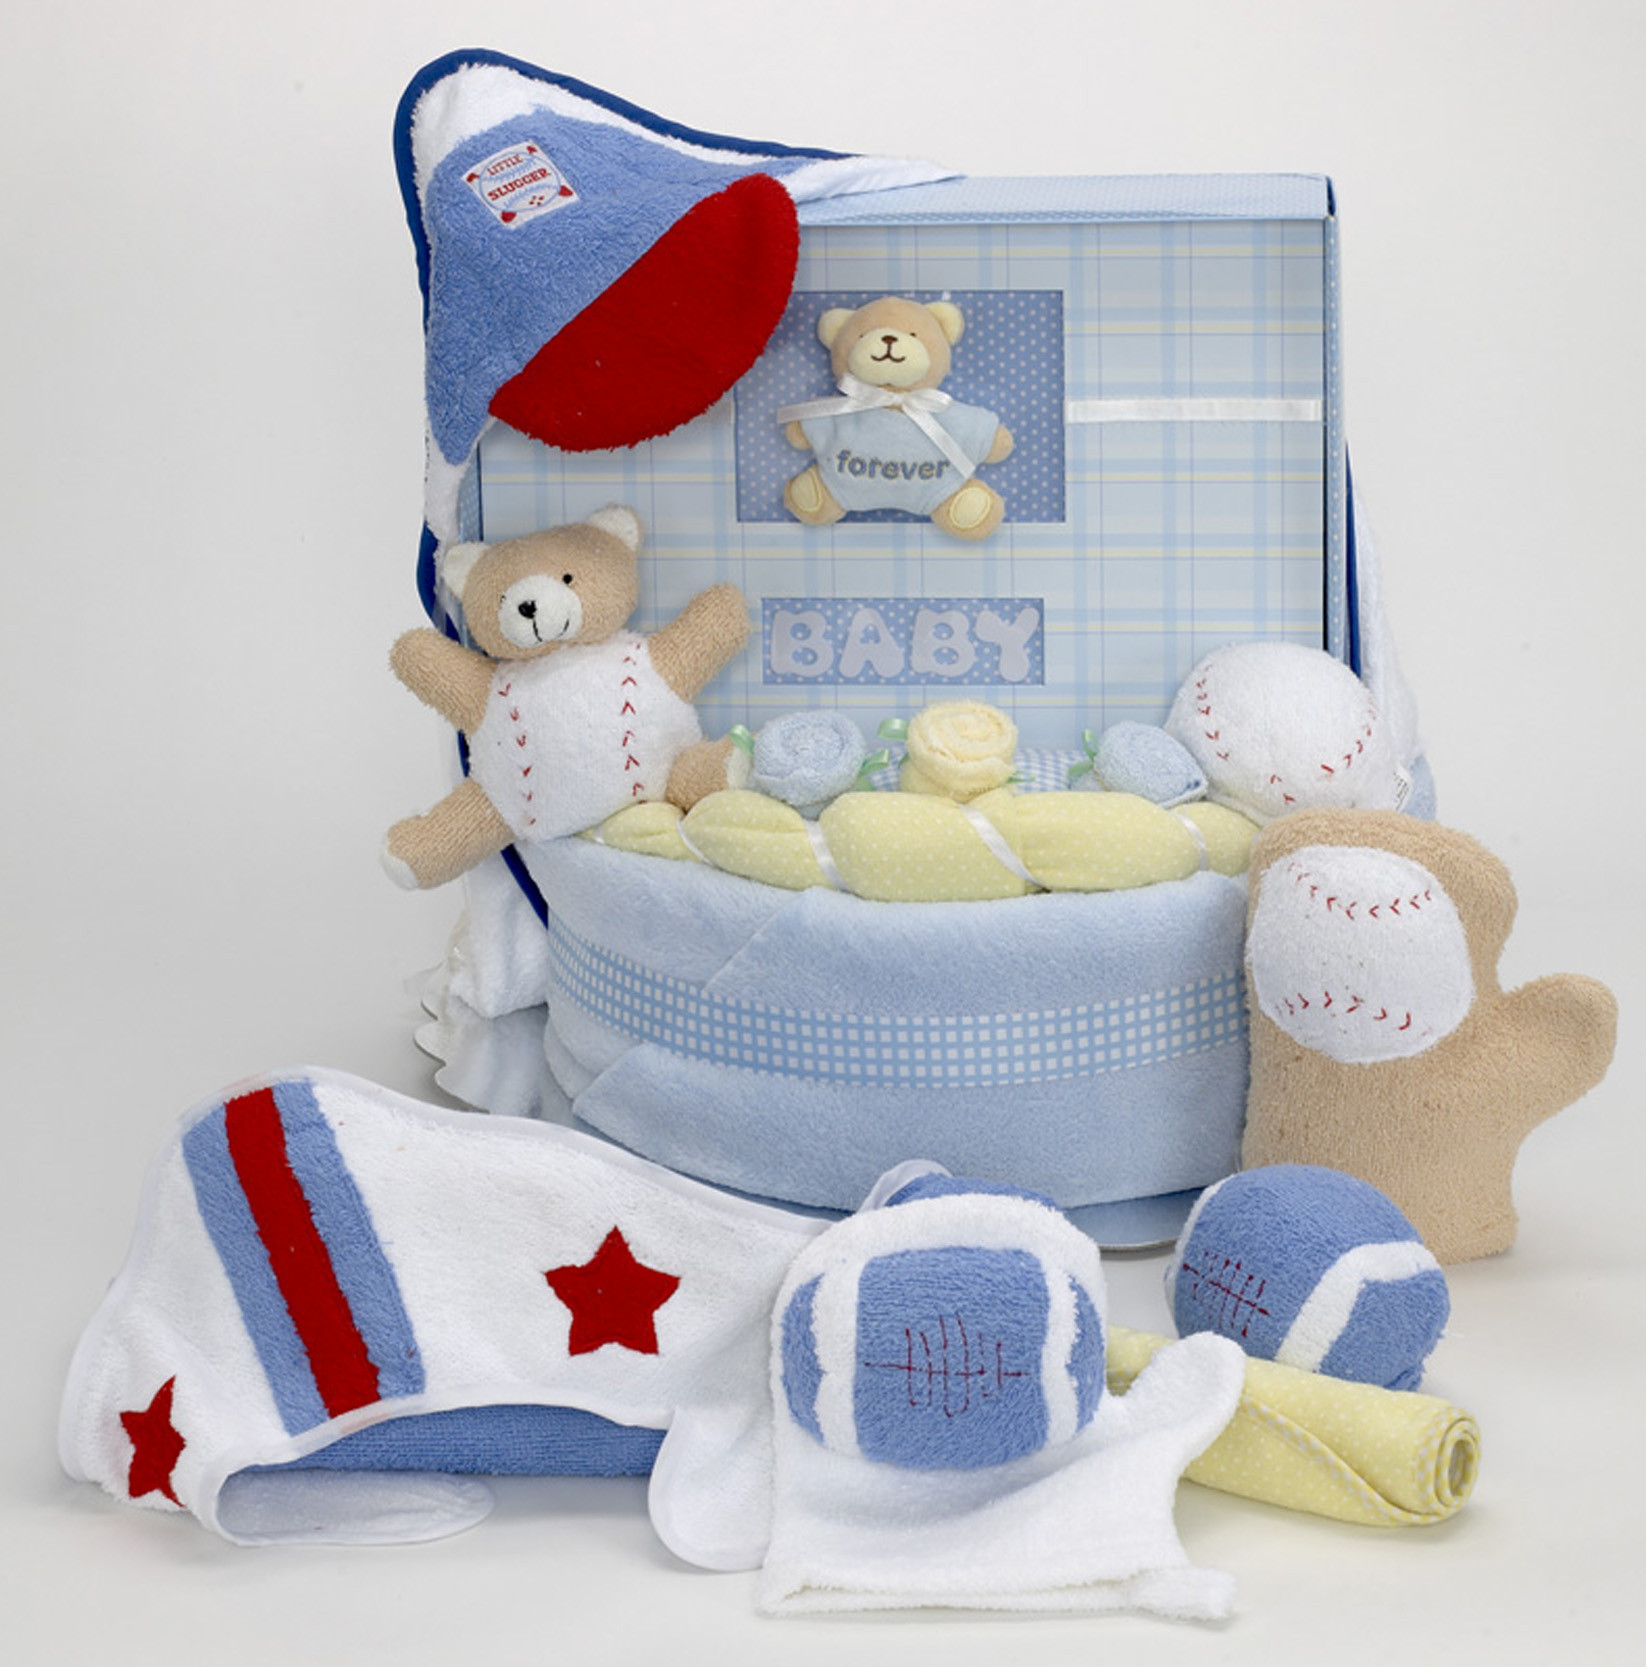 Best Boy Baby Gifts
 5 Best Baby Boy Gifts News from Silly Phillie